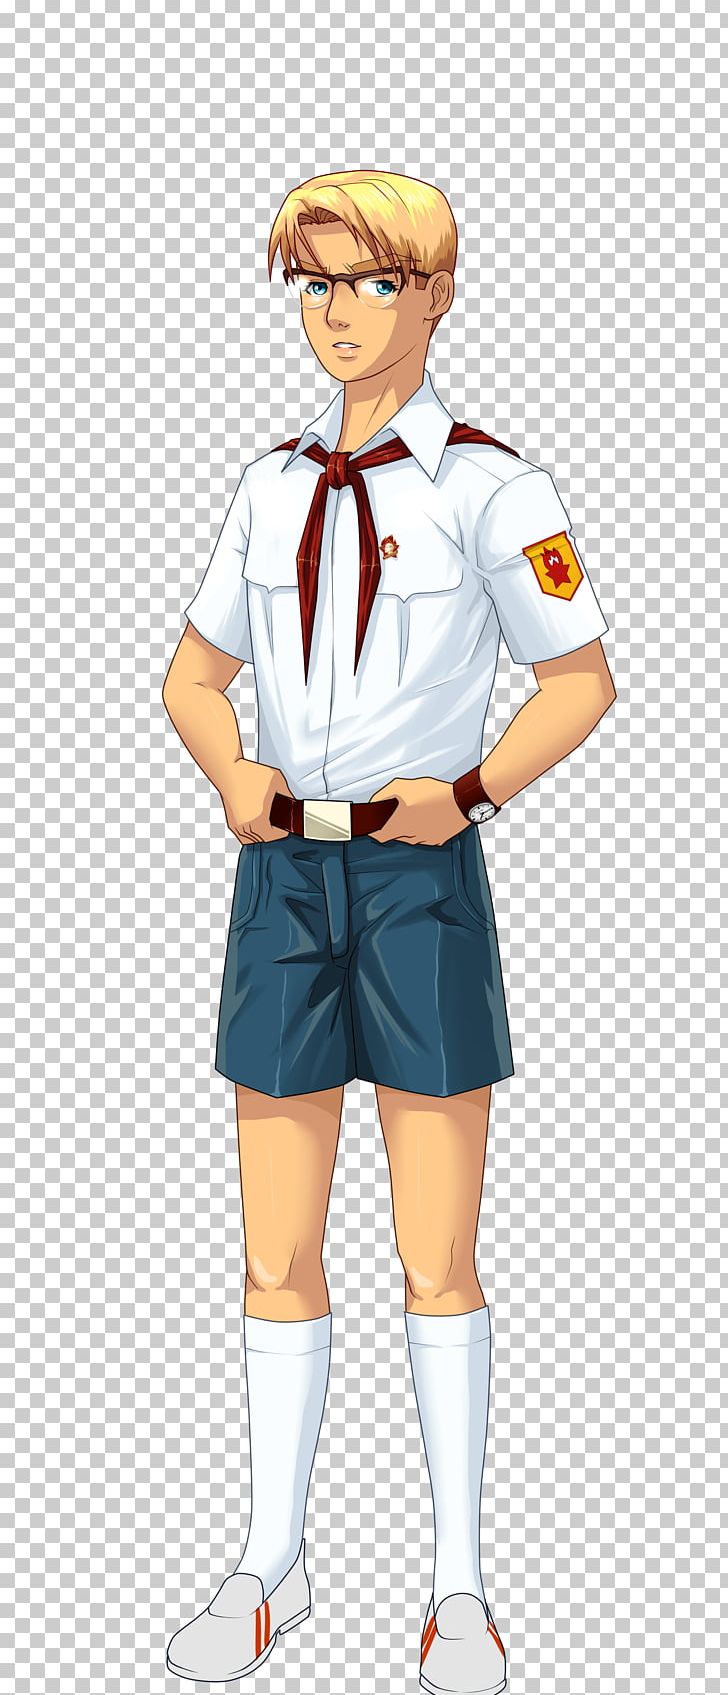 Everlasting Summer Aleksandr Demyanenko Wikia Fandom PNG, Clipart, Anime, Author, Boy, Character, Clothing Free PNG Download